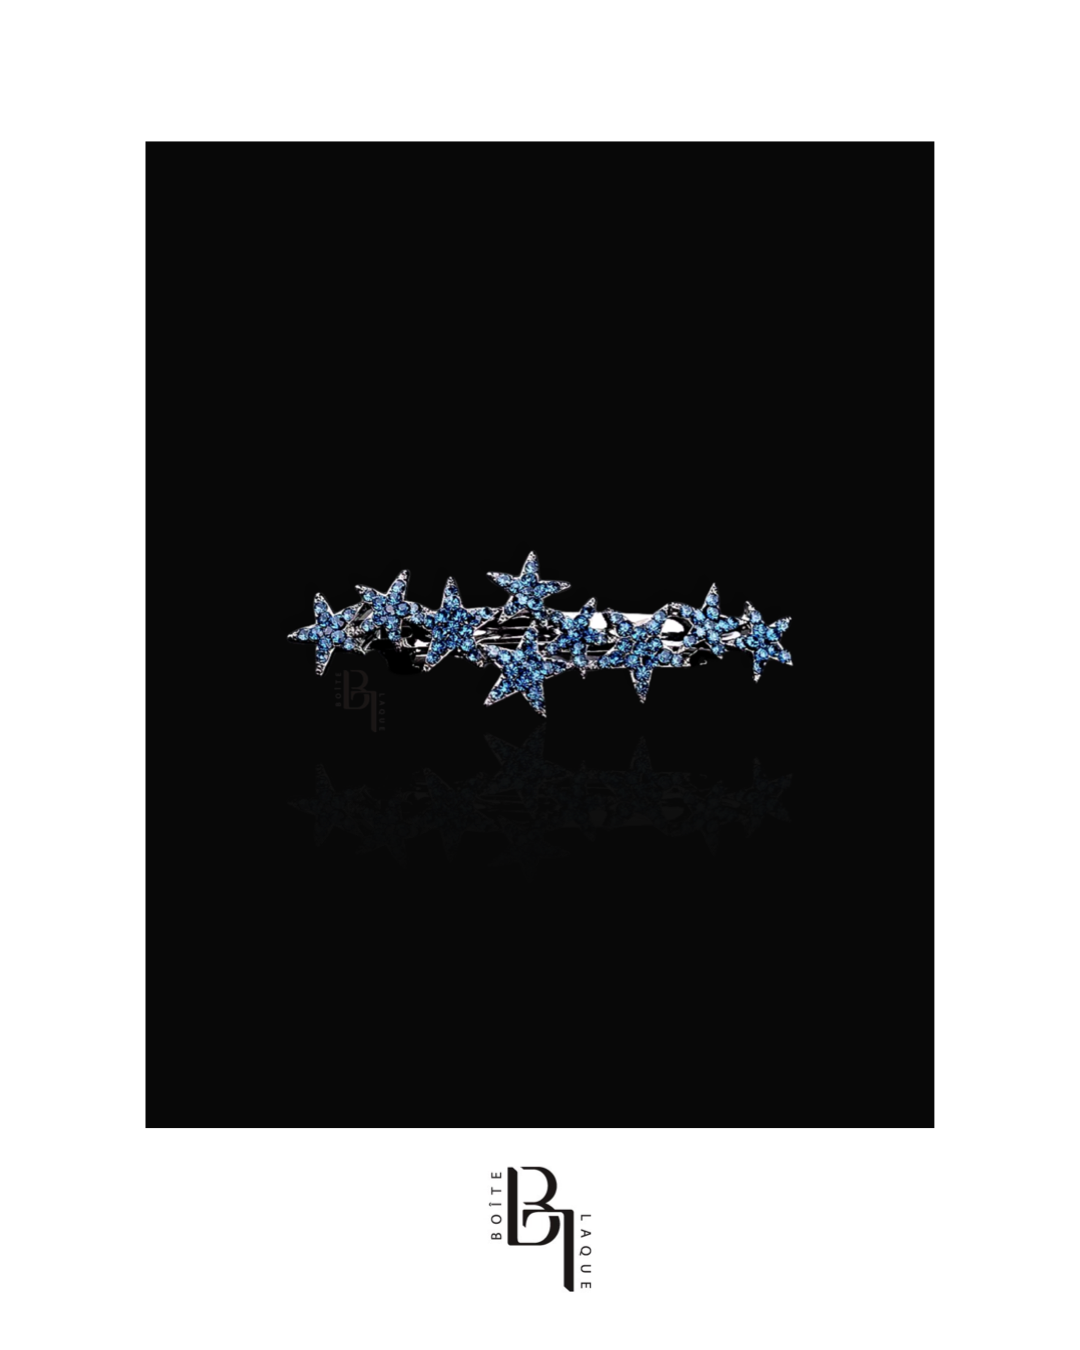 Blue Crystal Stars barrette Clip with Set of Signature Silver Bobby Pins